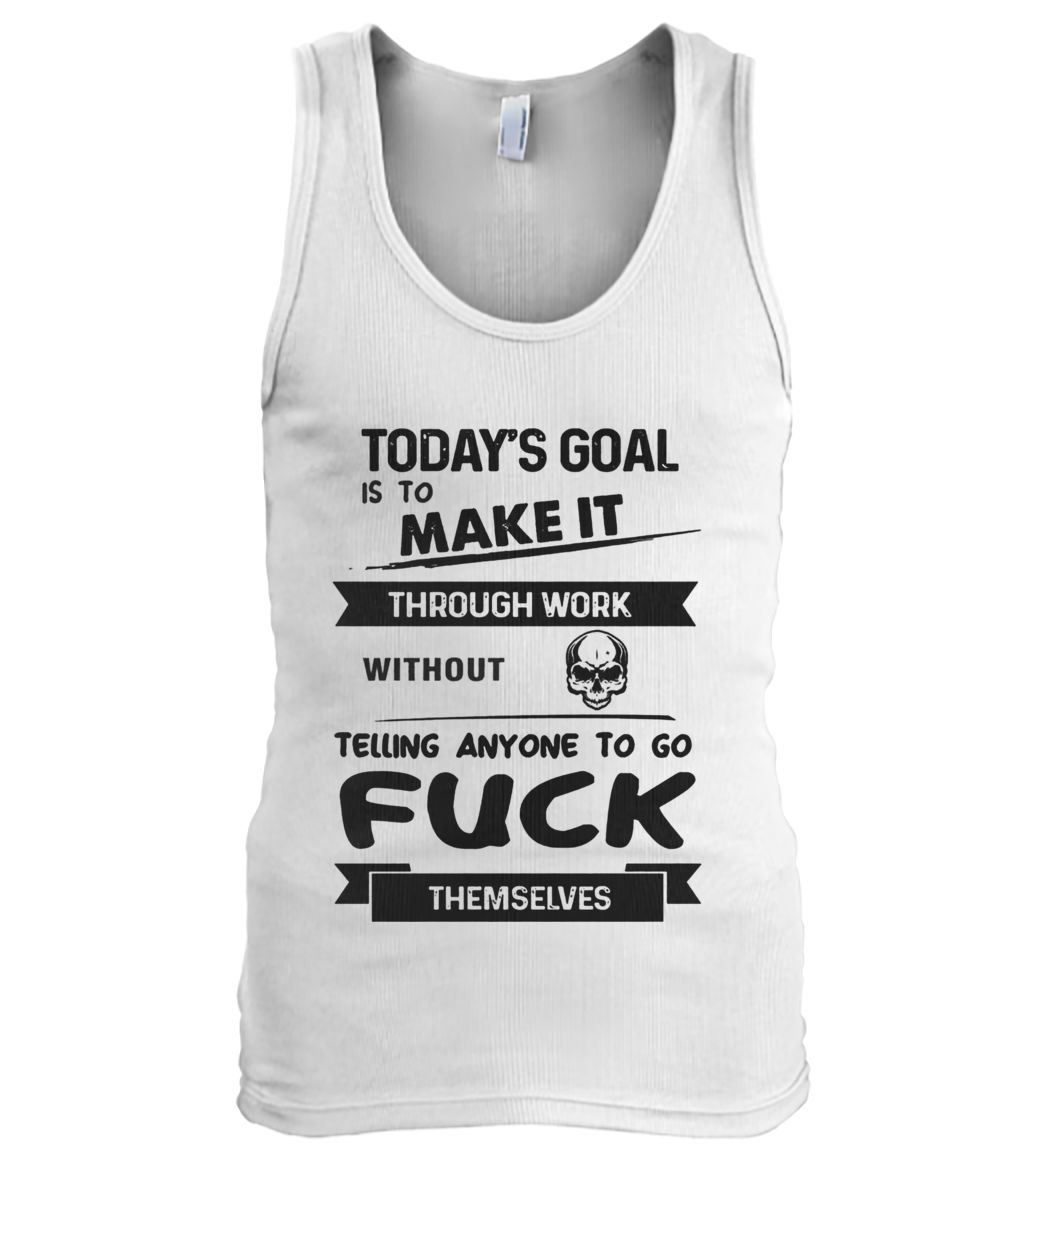 Today's goal is to make it through work without telling anyone to go fuck themselves tank top